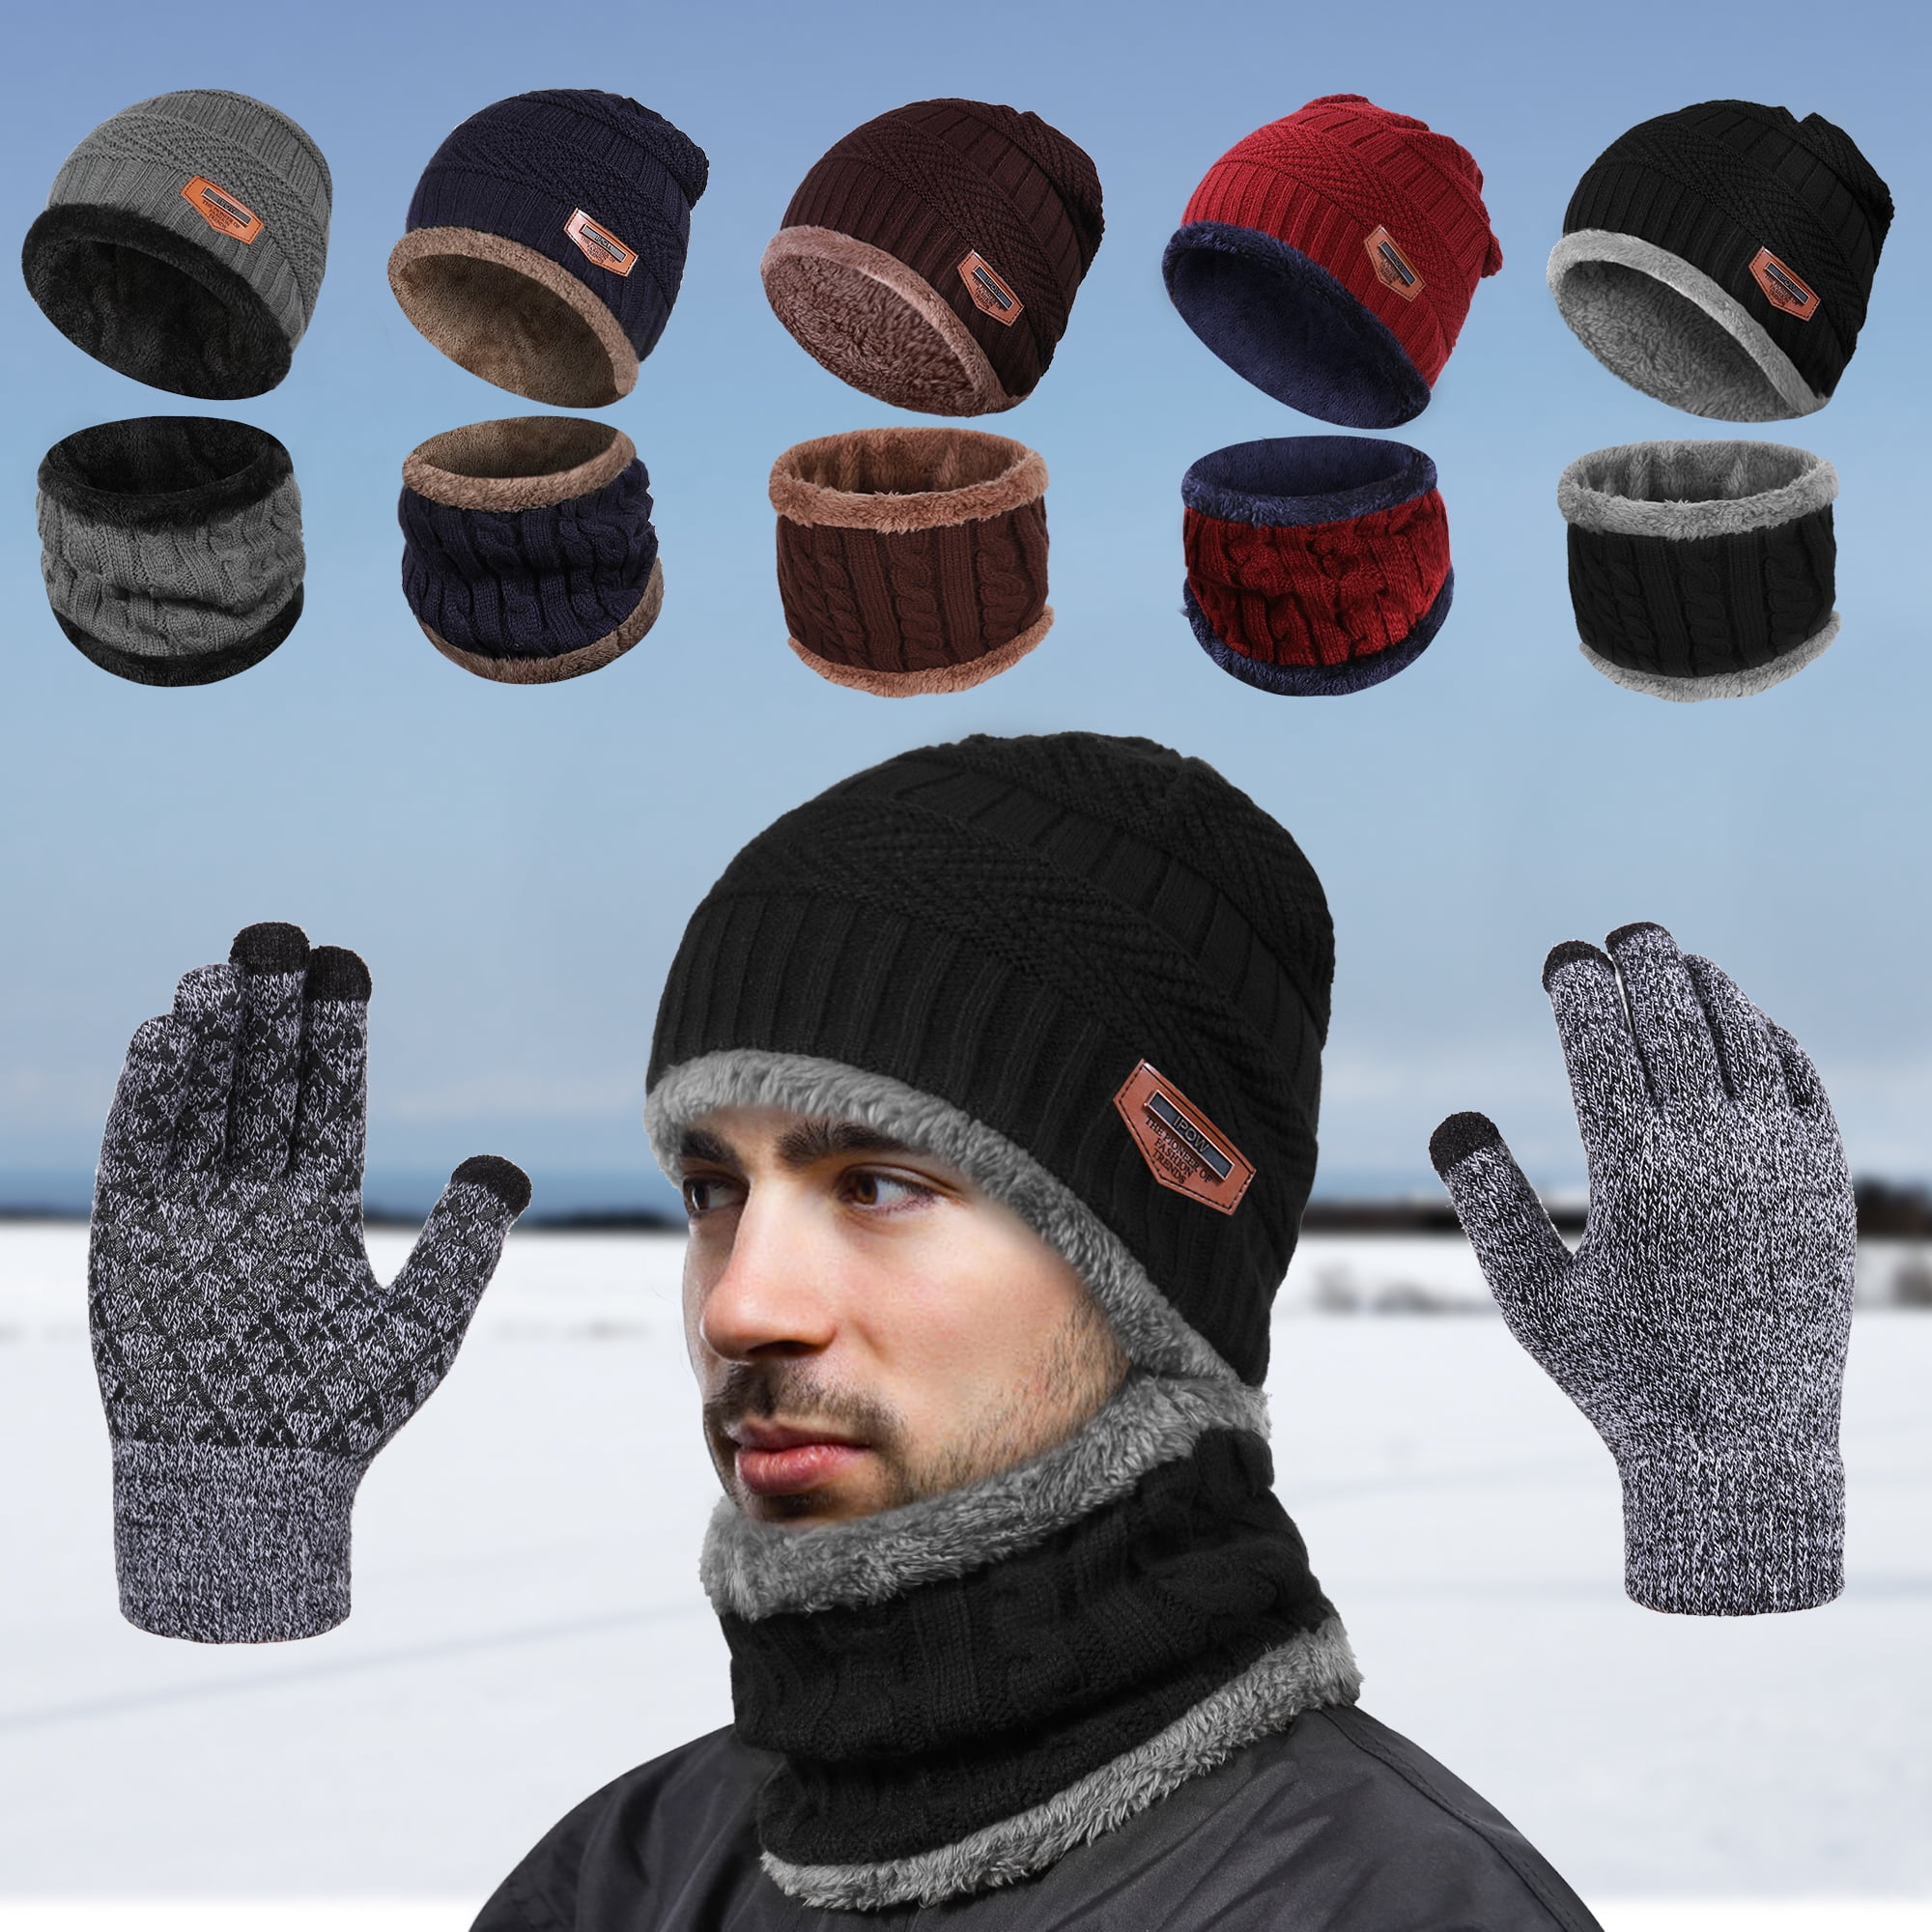 Thick Short Clabe Knit Beanie Winter Ski Hat Skull Cap CLEARANCE SALE! 